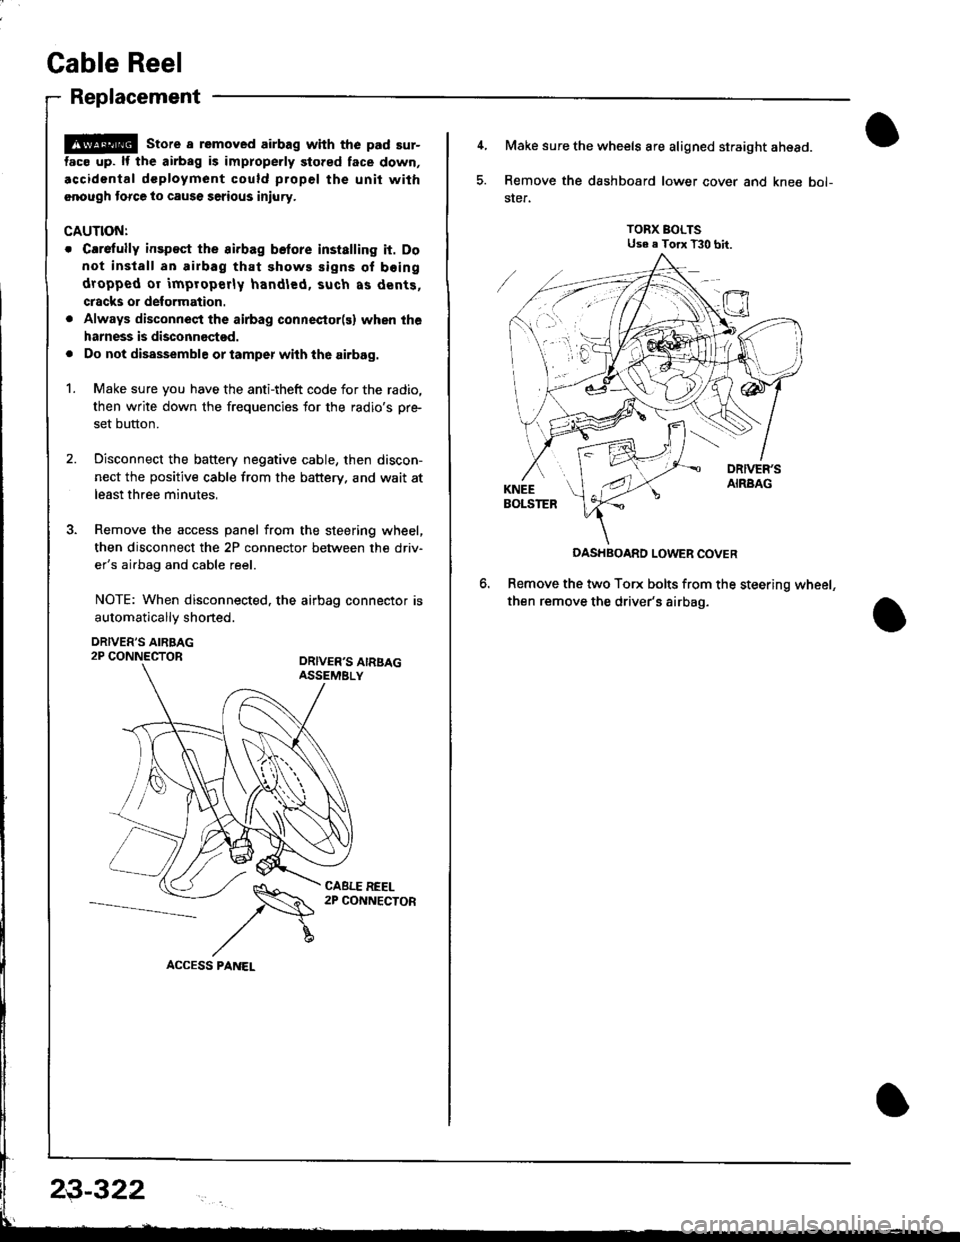 HONDA INTEGRA 1998 4.G Owners Manual Cable Reel
Replacement
@ store a removed airbag with the pad sur-
tac€ up. lf the airbag is improperly stored face down,
.ccidontal dcployment could propel the unit with
.nough torce to cause seriou